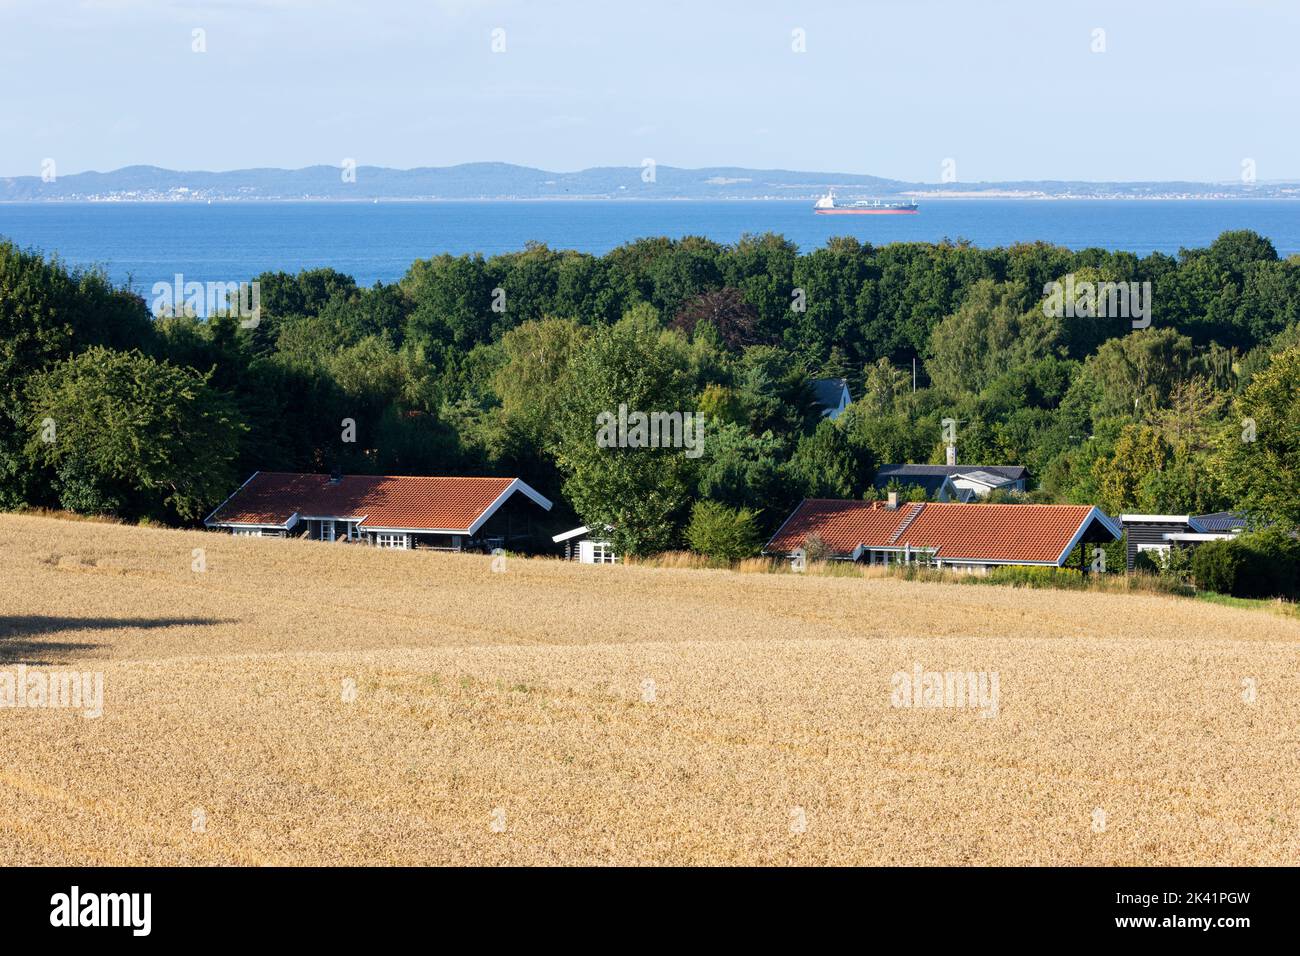 View across wheat field and summer houses in Munkerup to coastline of Sweden in distance, Munkerup, Zealand, Denmark Stock Photo